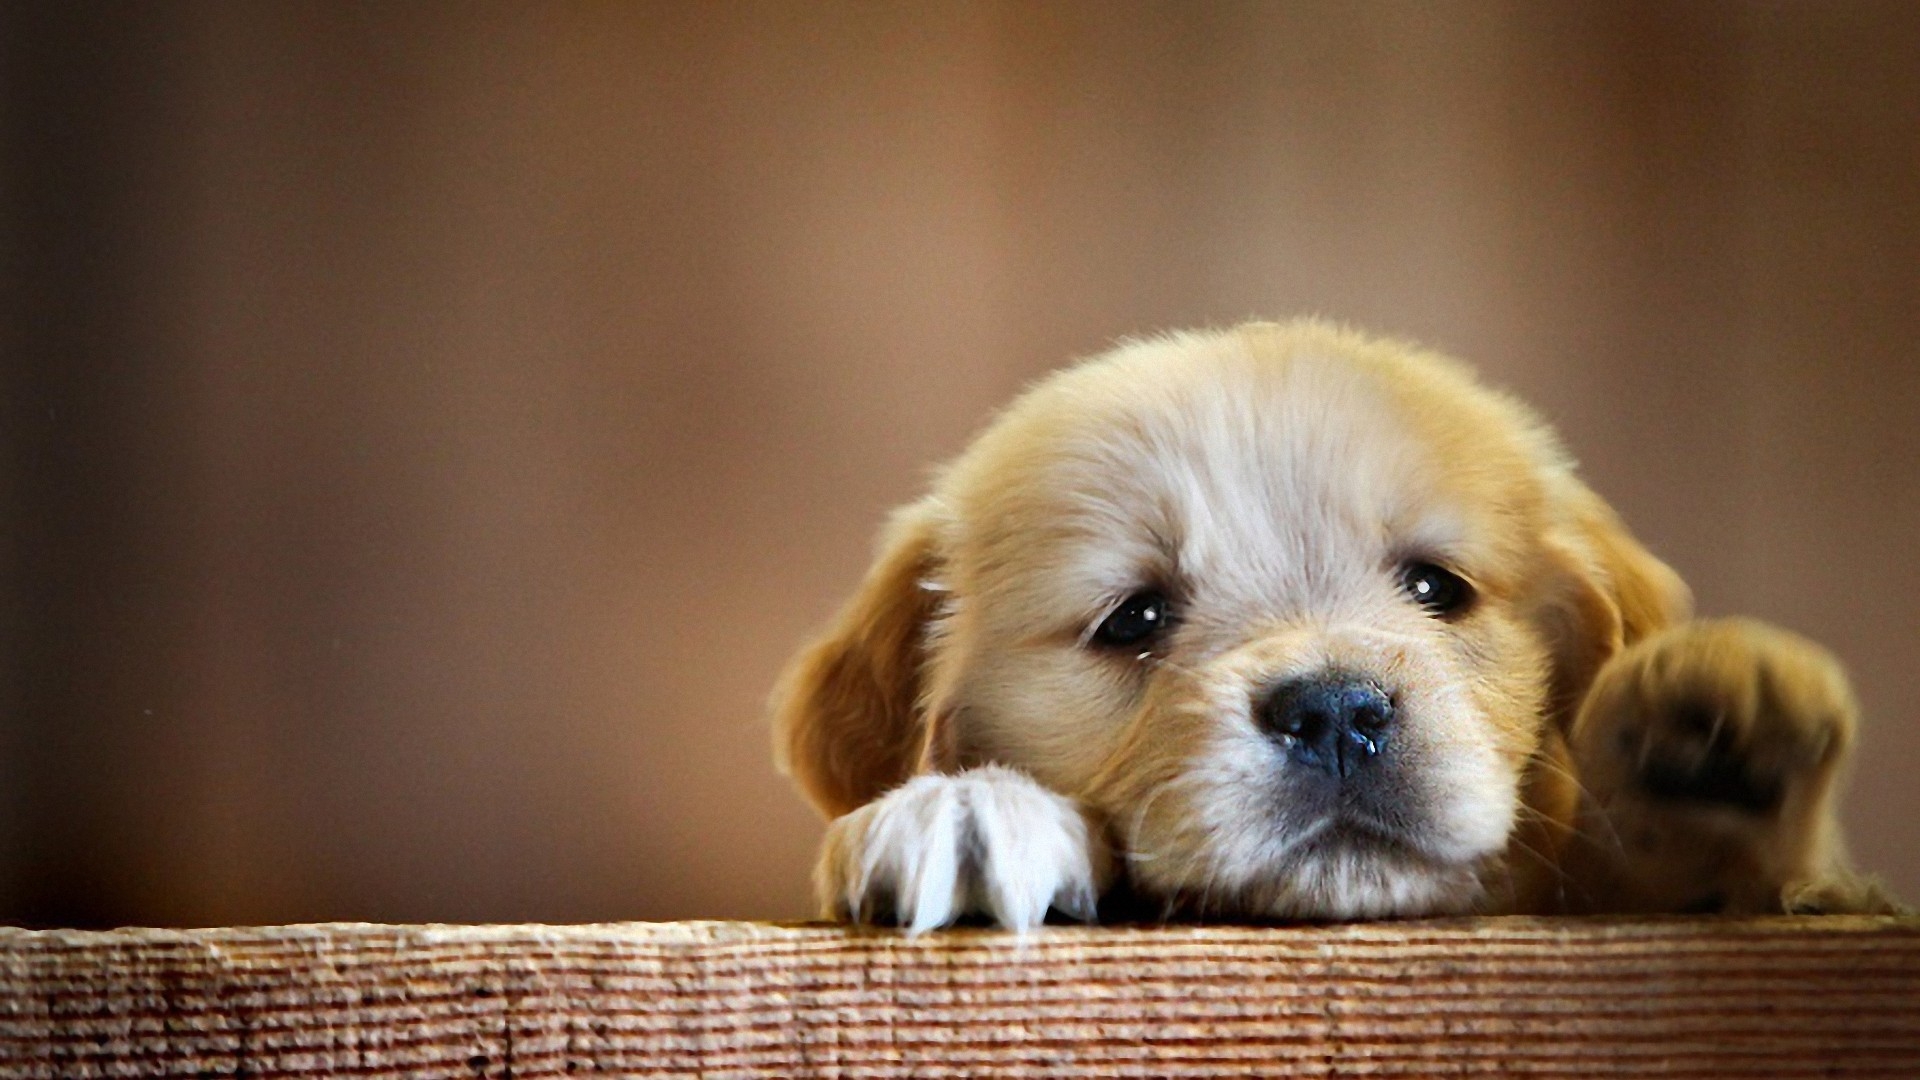 Very Cute Little Puppy for 1920 x 1080 HDTV 1080p resolution